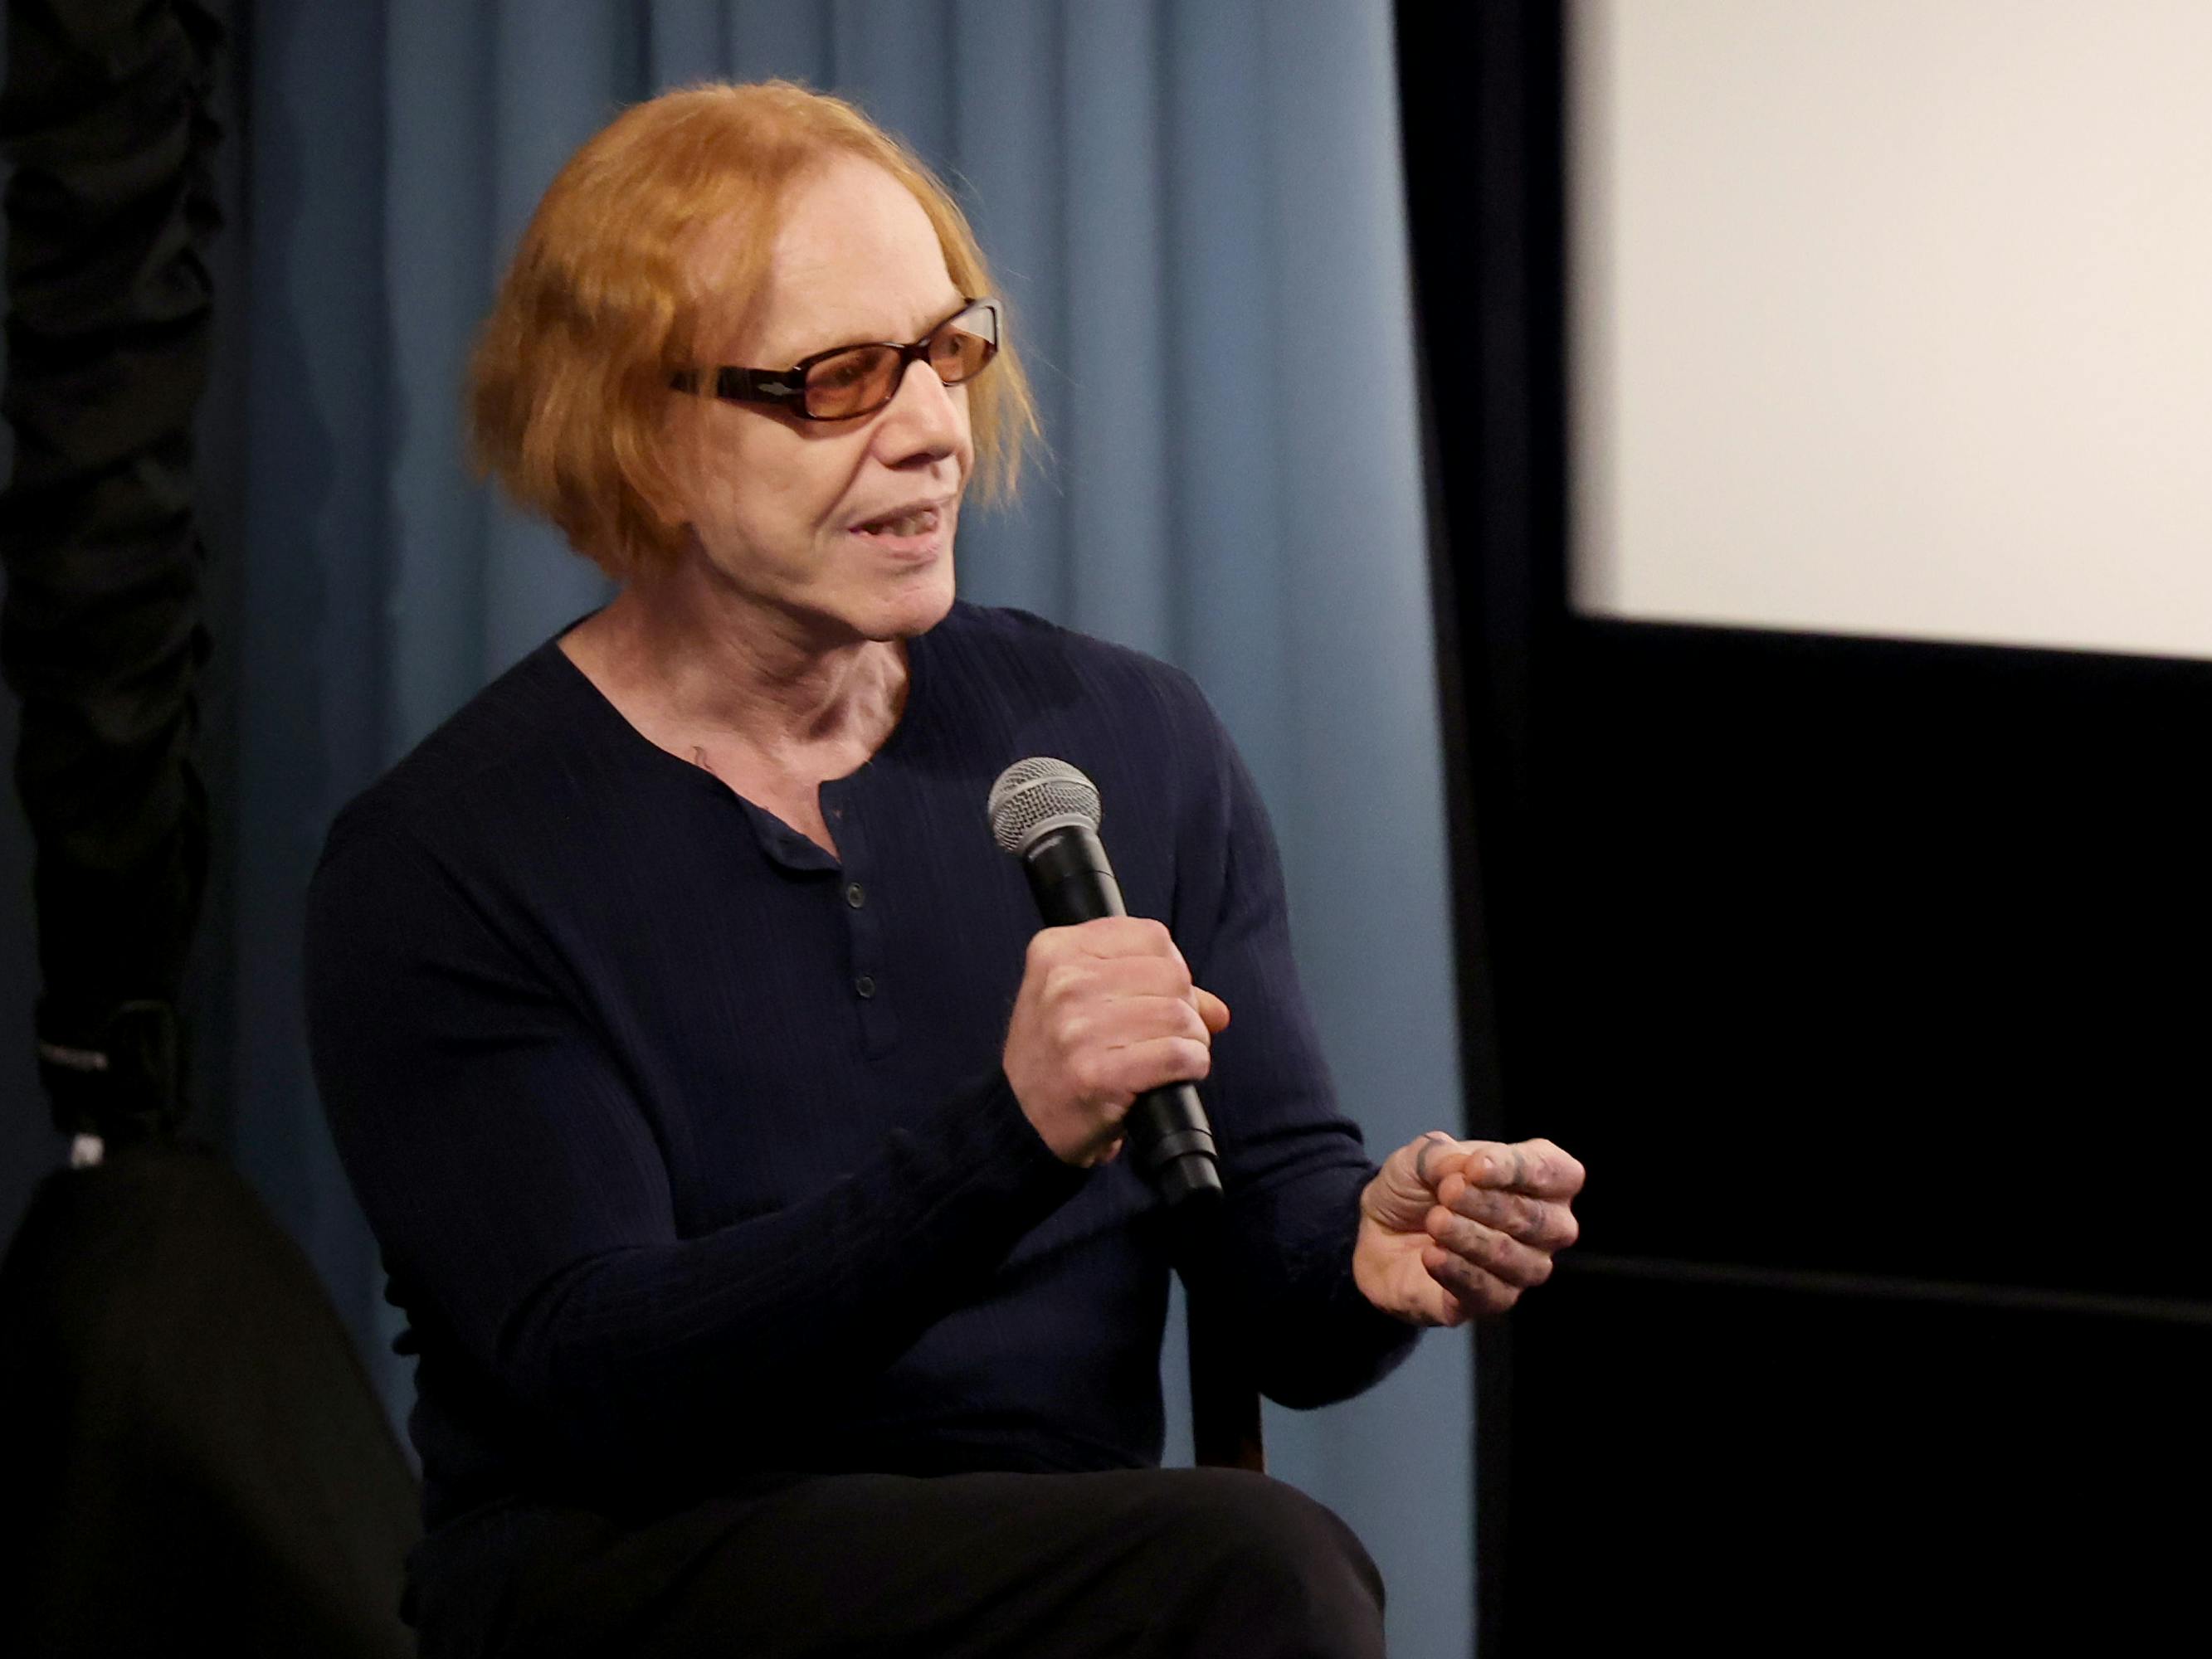 Danny Elfman wears his signature orange glasses and talks into a microphone.